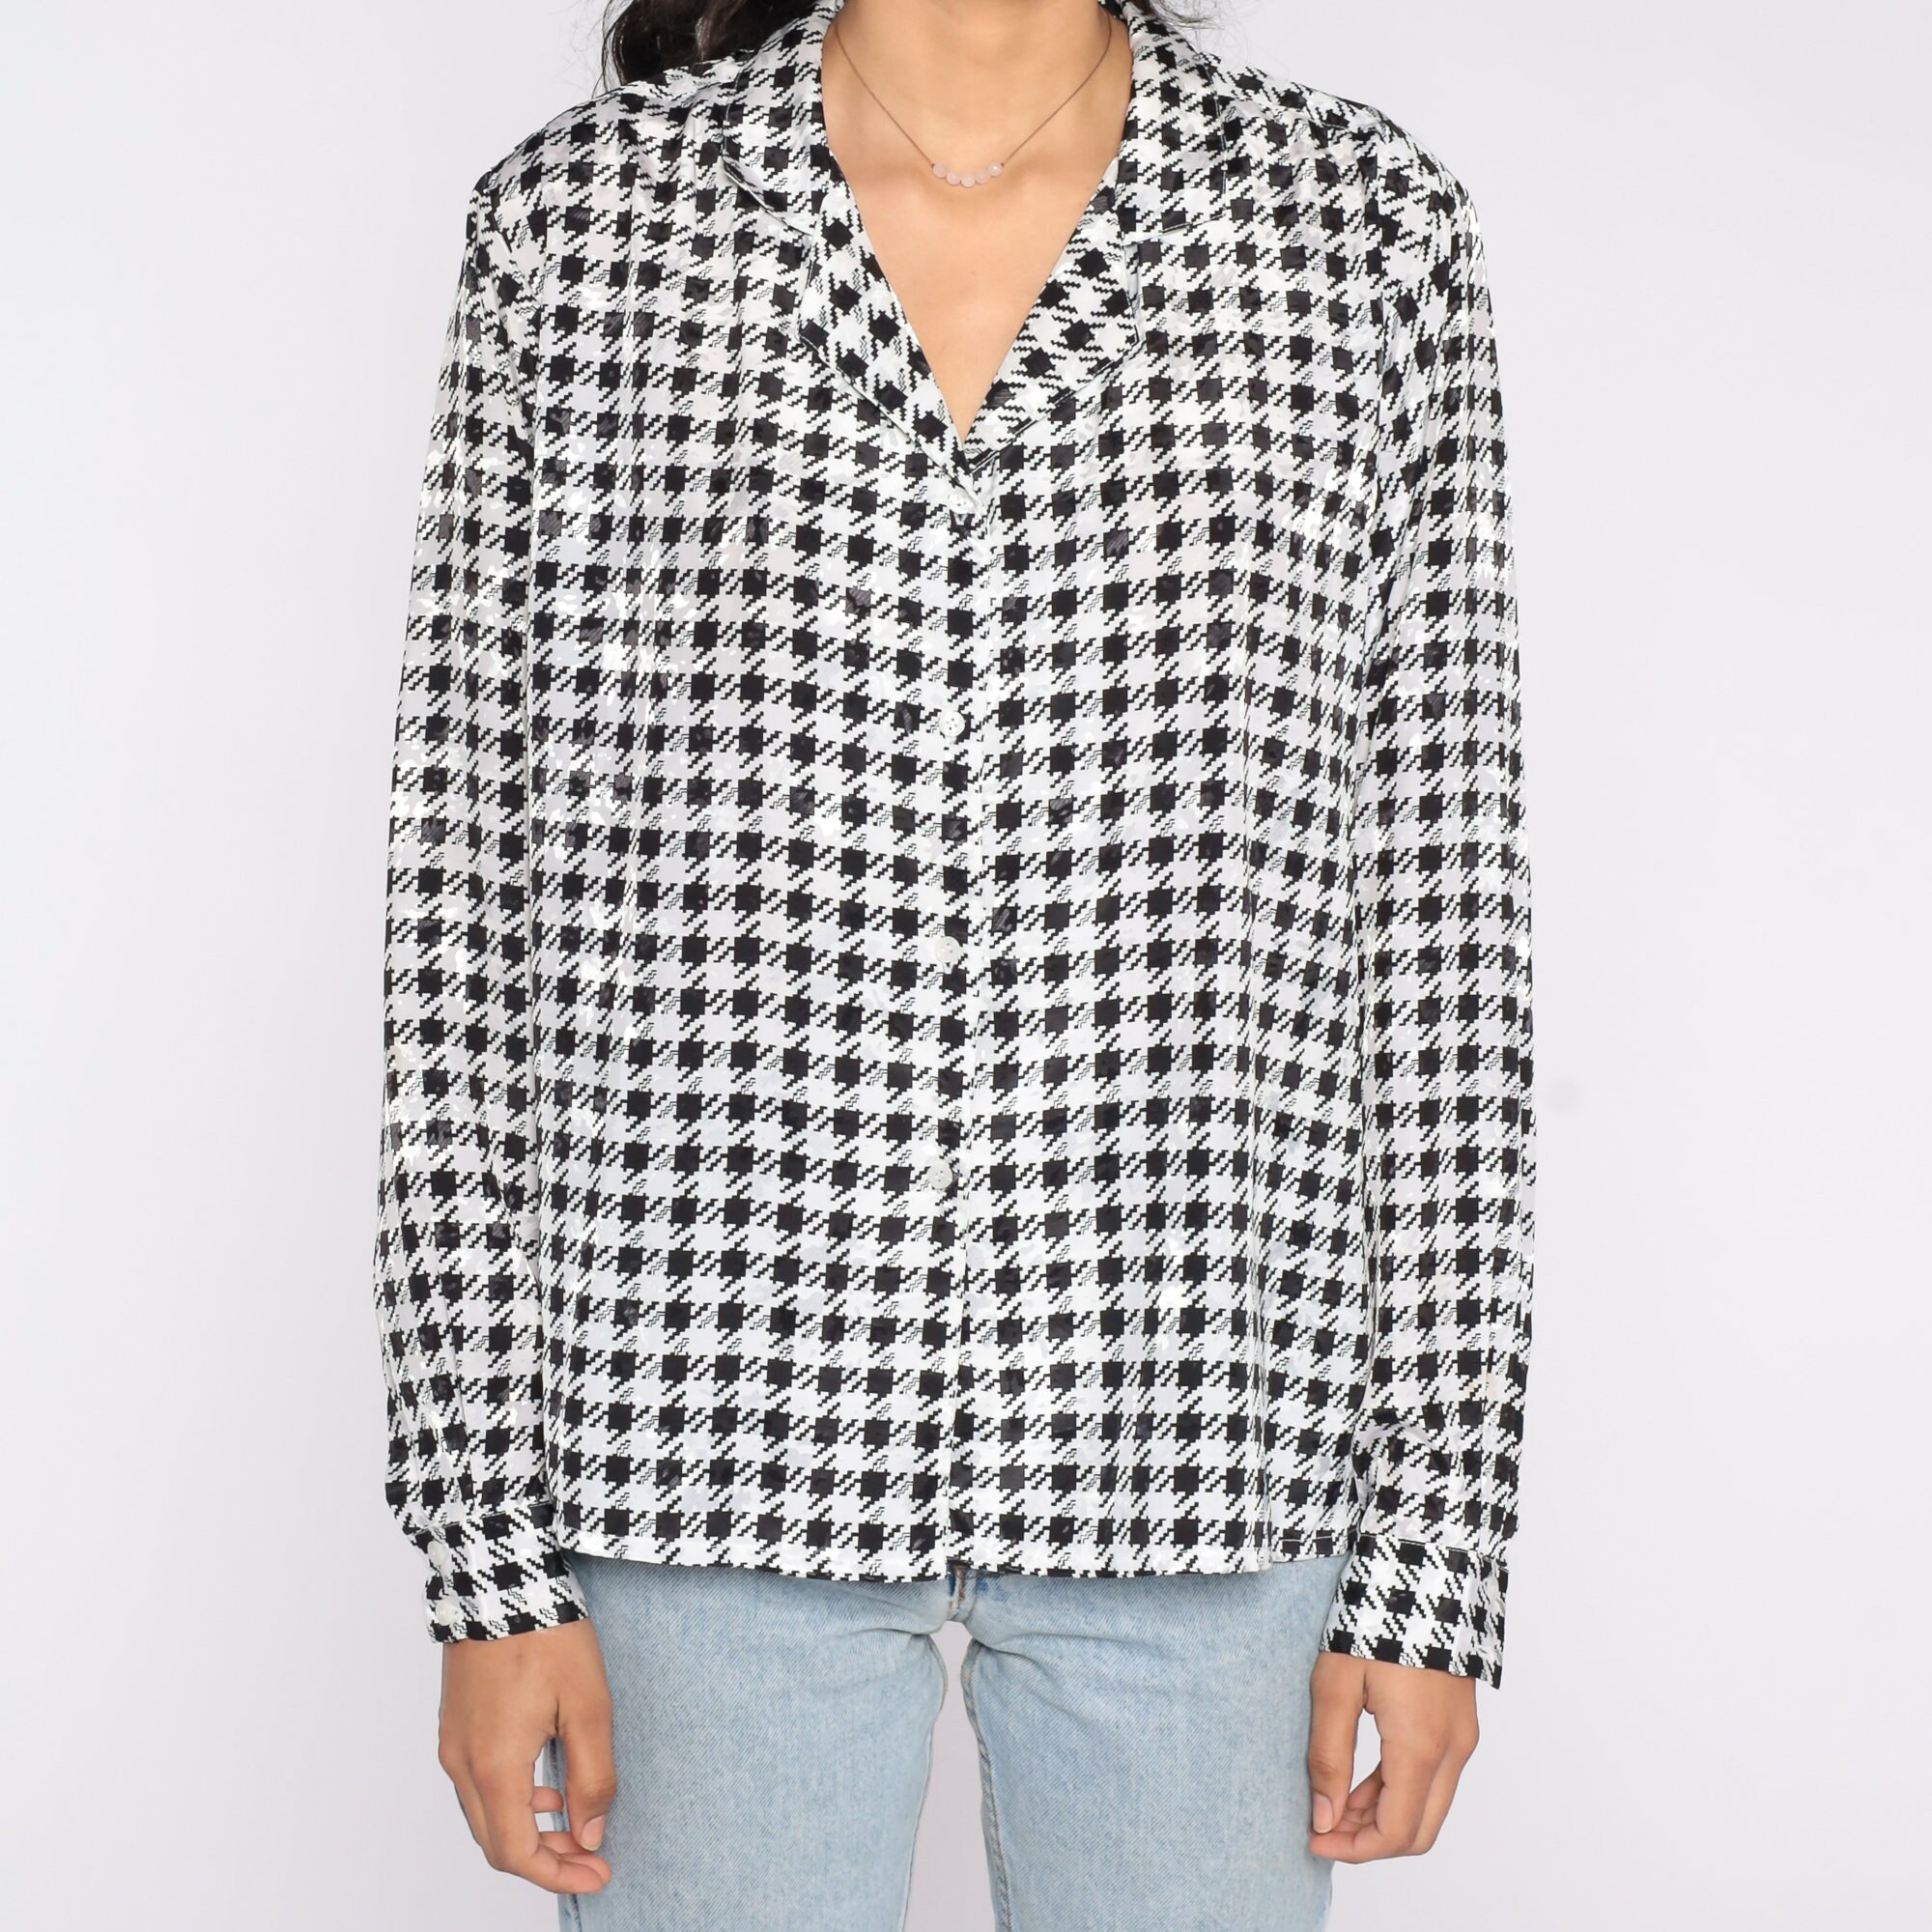 90s Checkered Blouse Black White Plaid Shirt Long Sleeve Collared Top ...